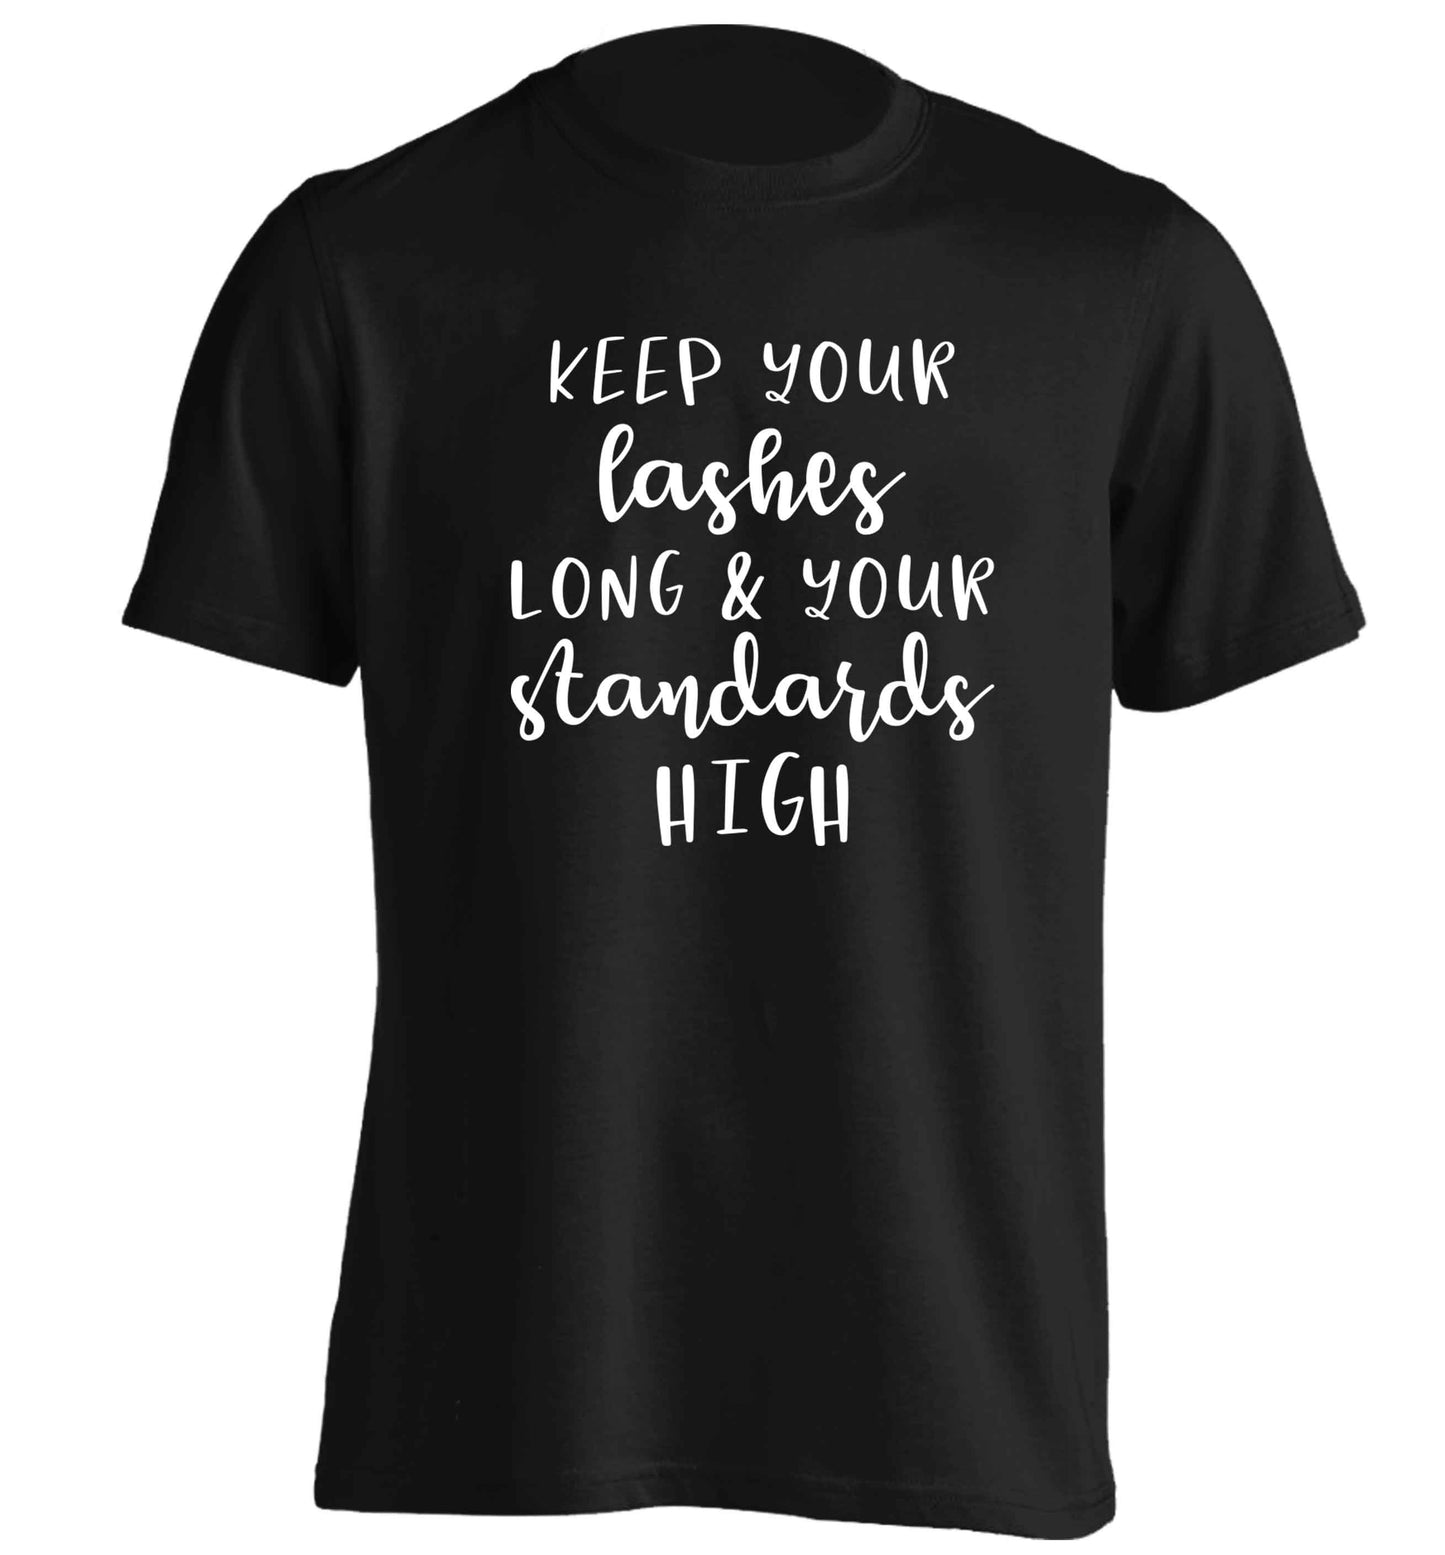 Keep your lashes long and your standards high adults unisex black Tshirt 2XL